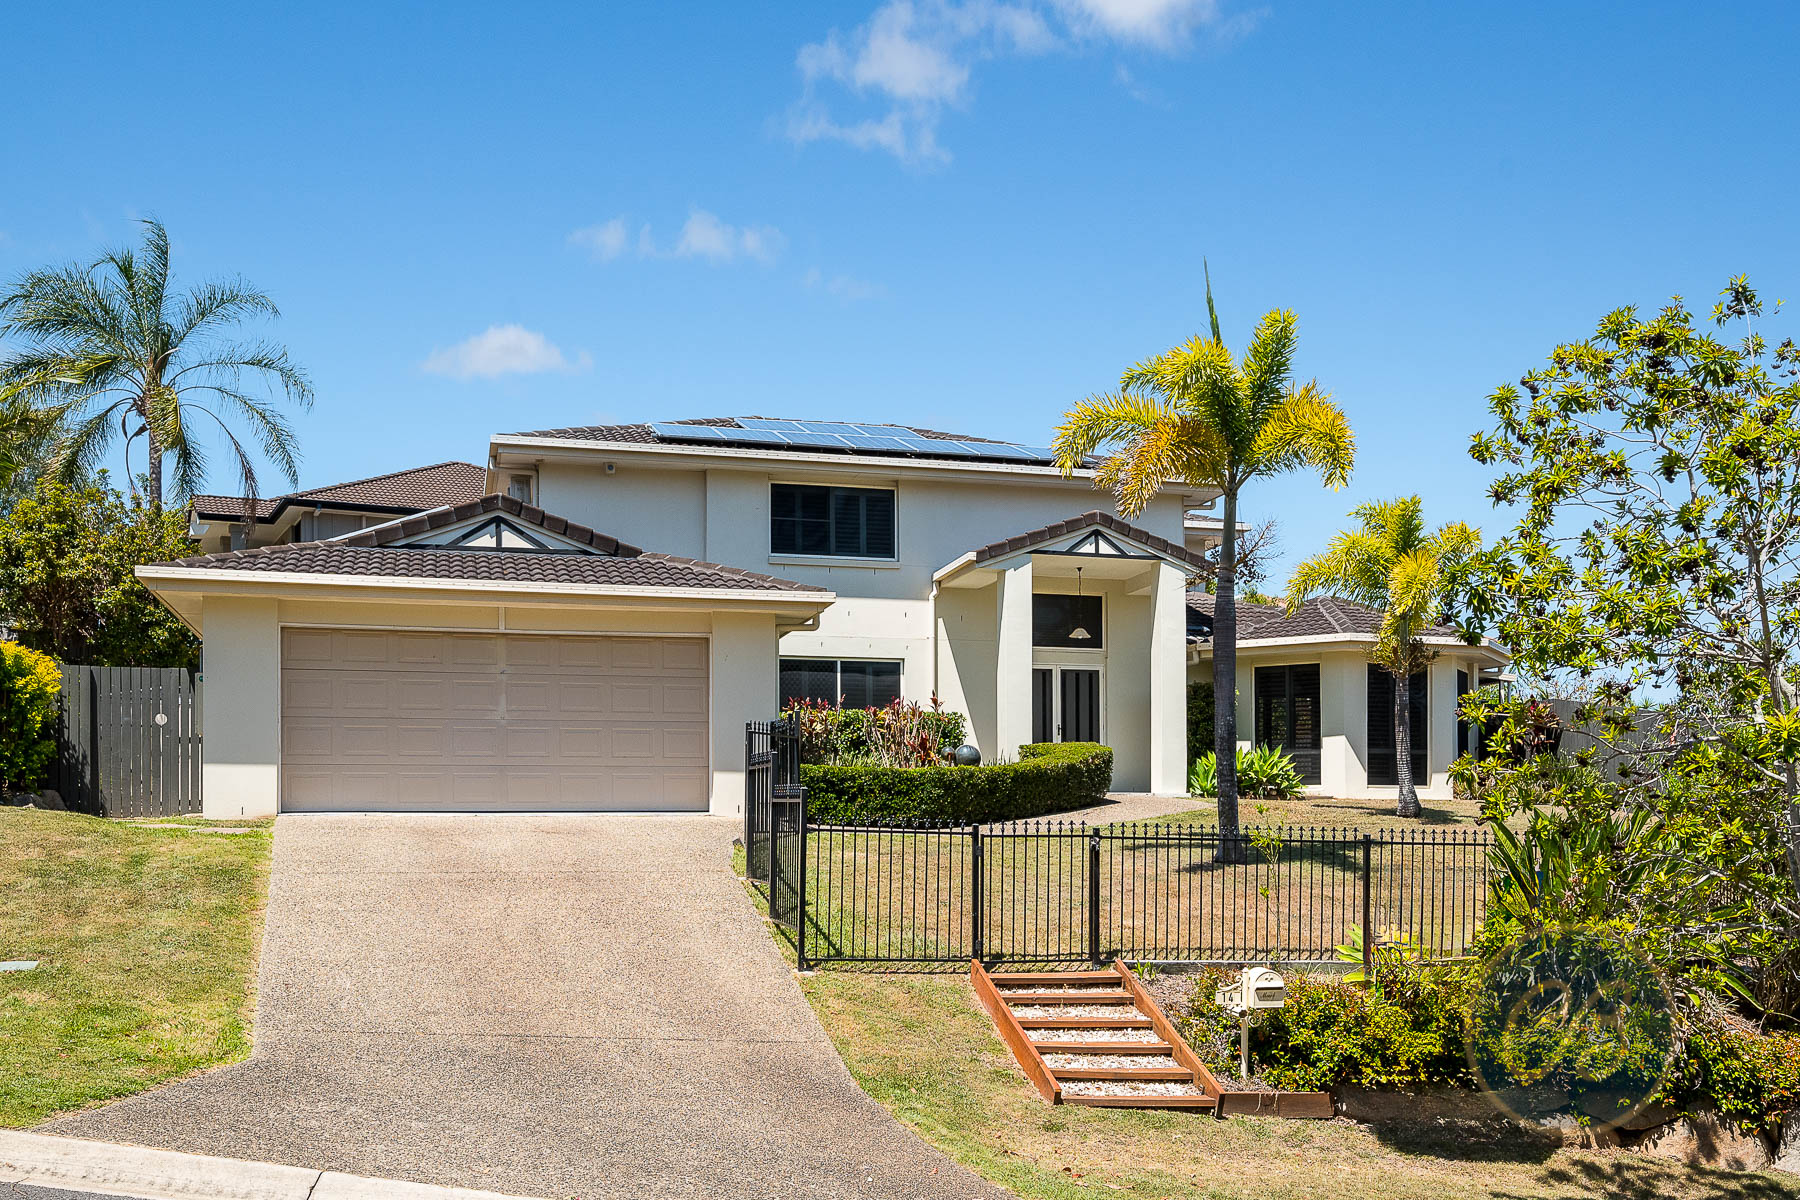 LEASED - 14 GLENDORE COURT, Eatons Hill